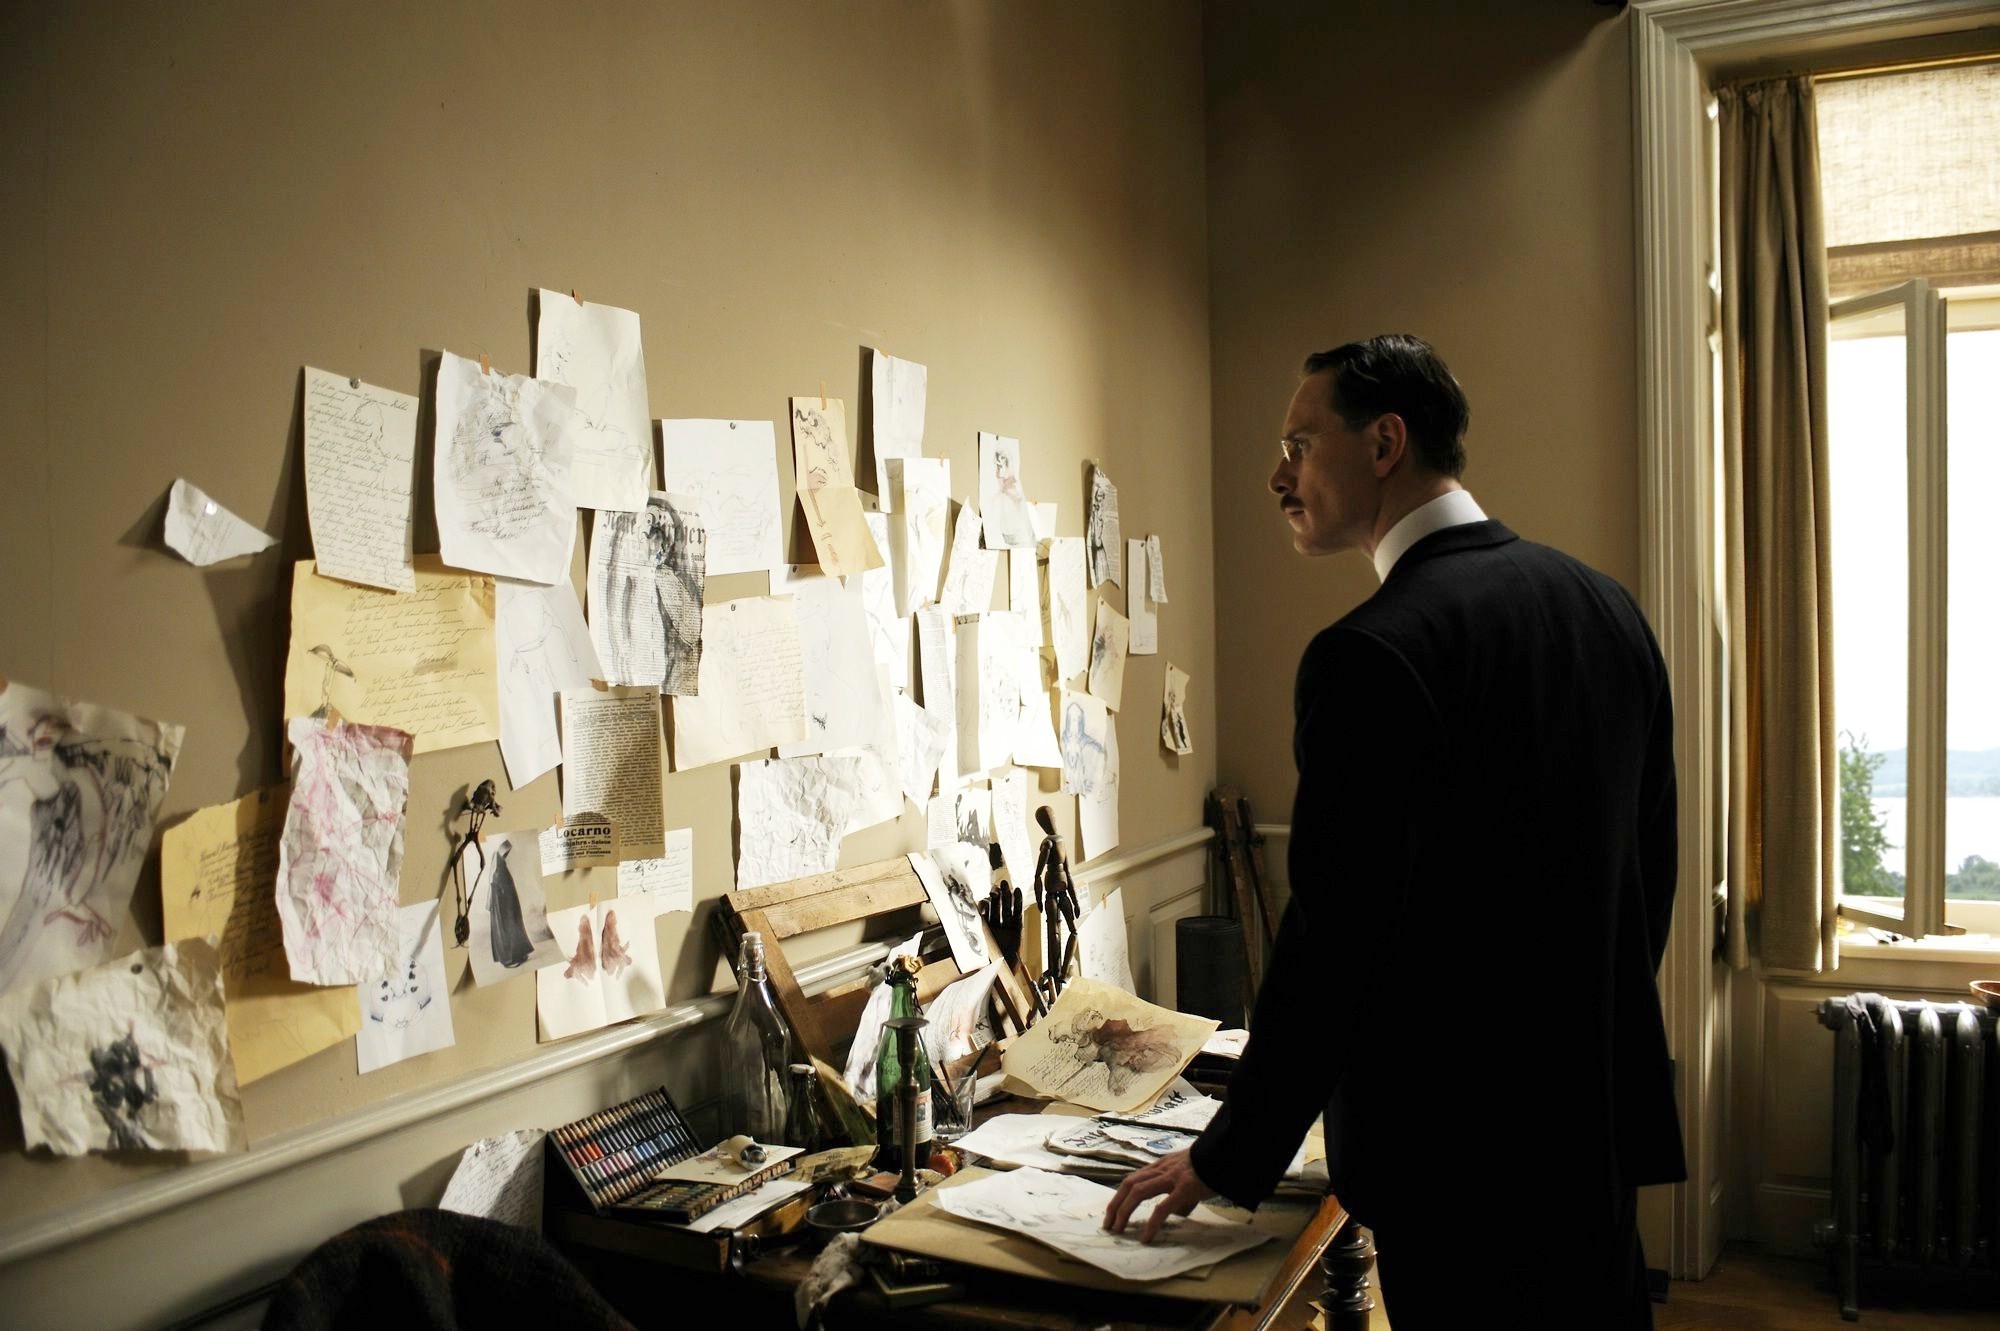 Michael Fassbender stars as Carl Jung in Sony Pictures Classics' A Dangerous Method (2011)